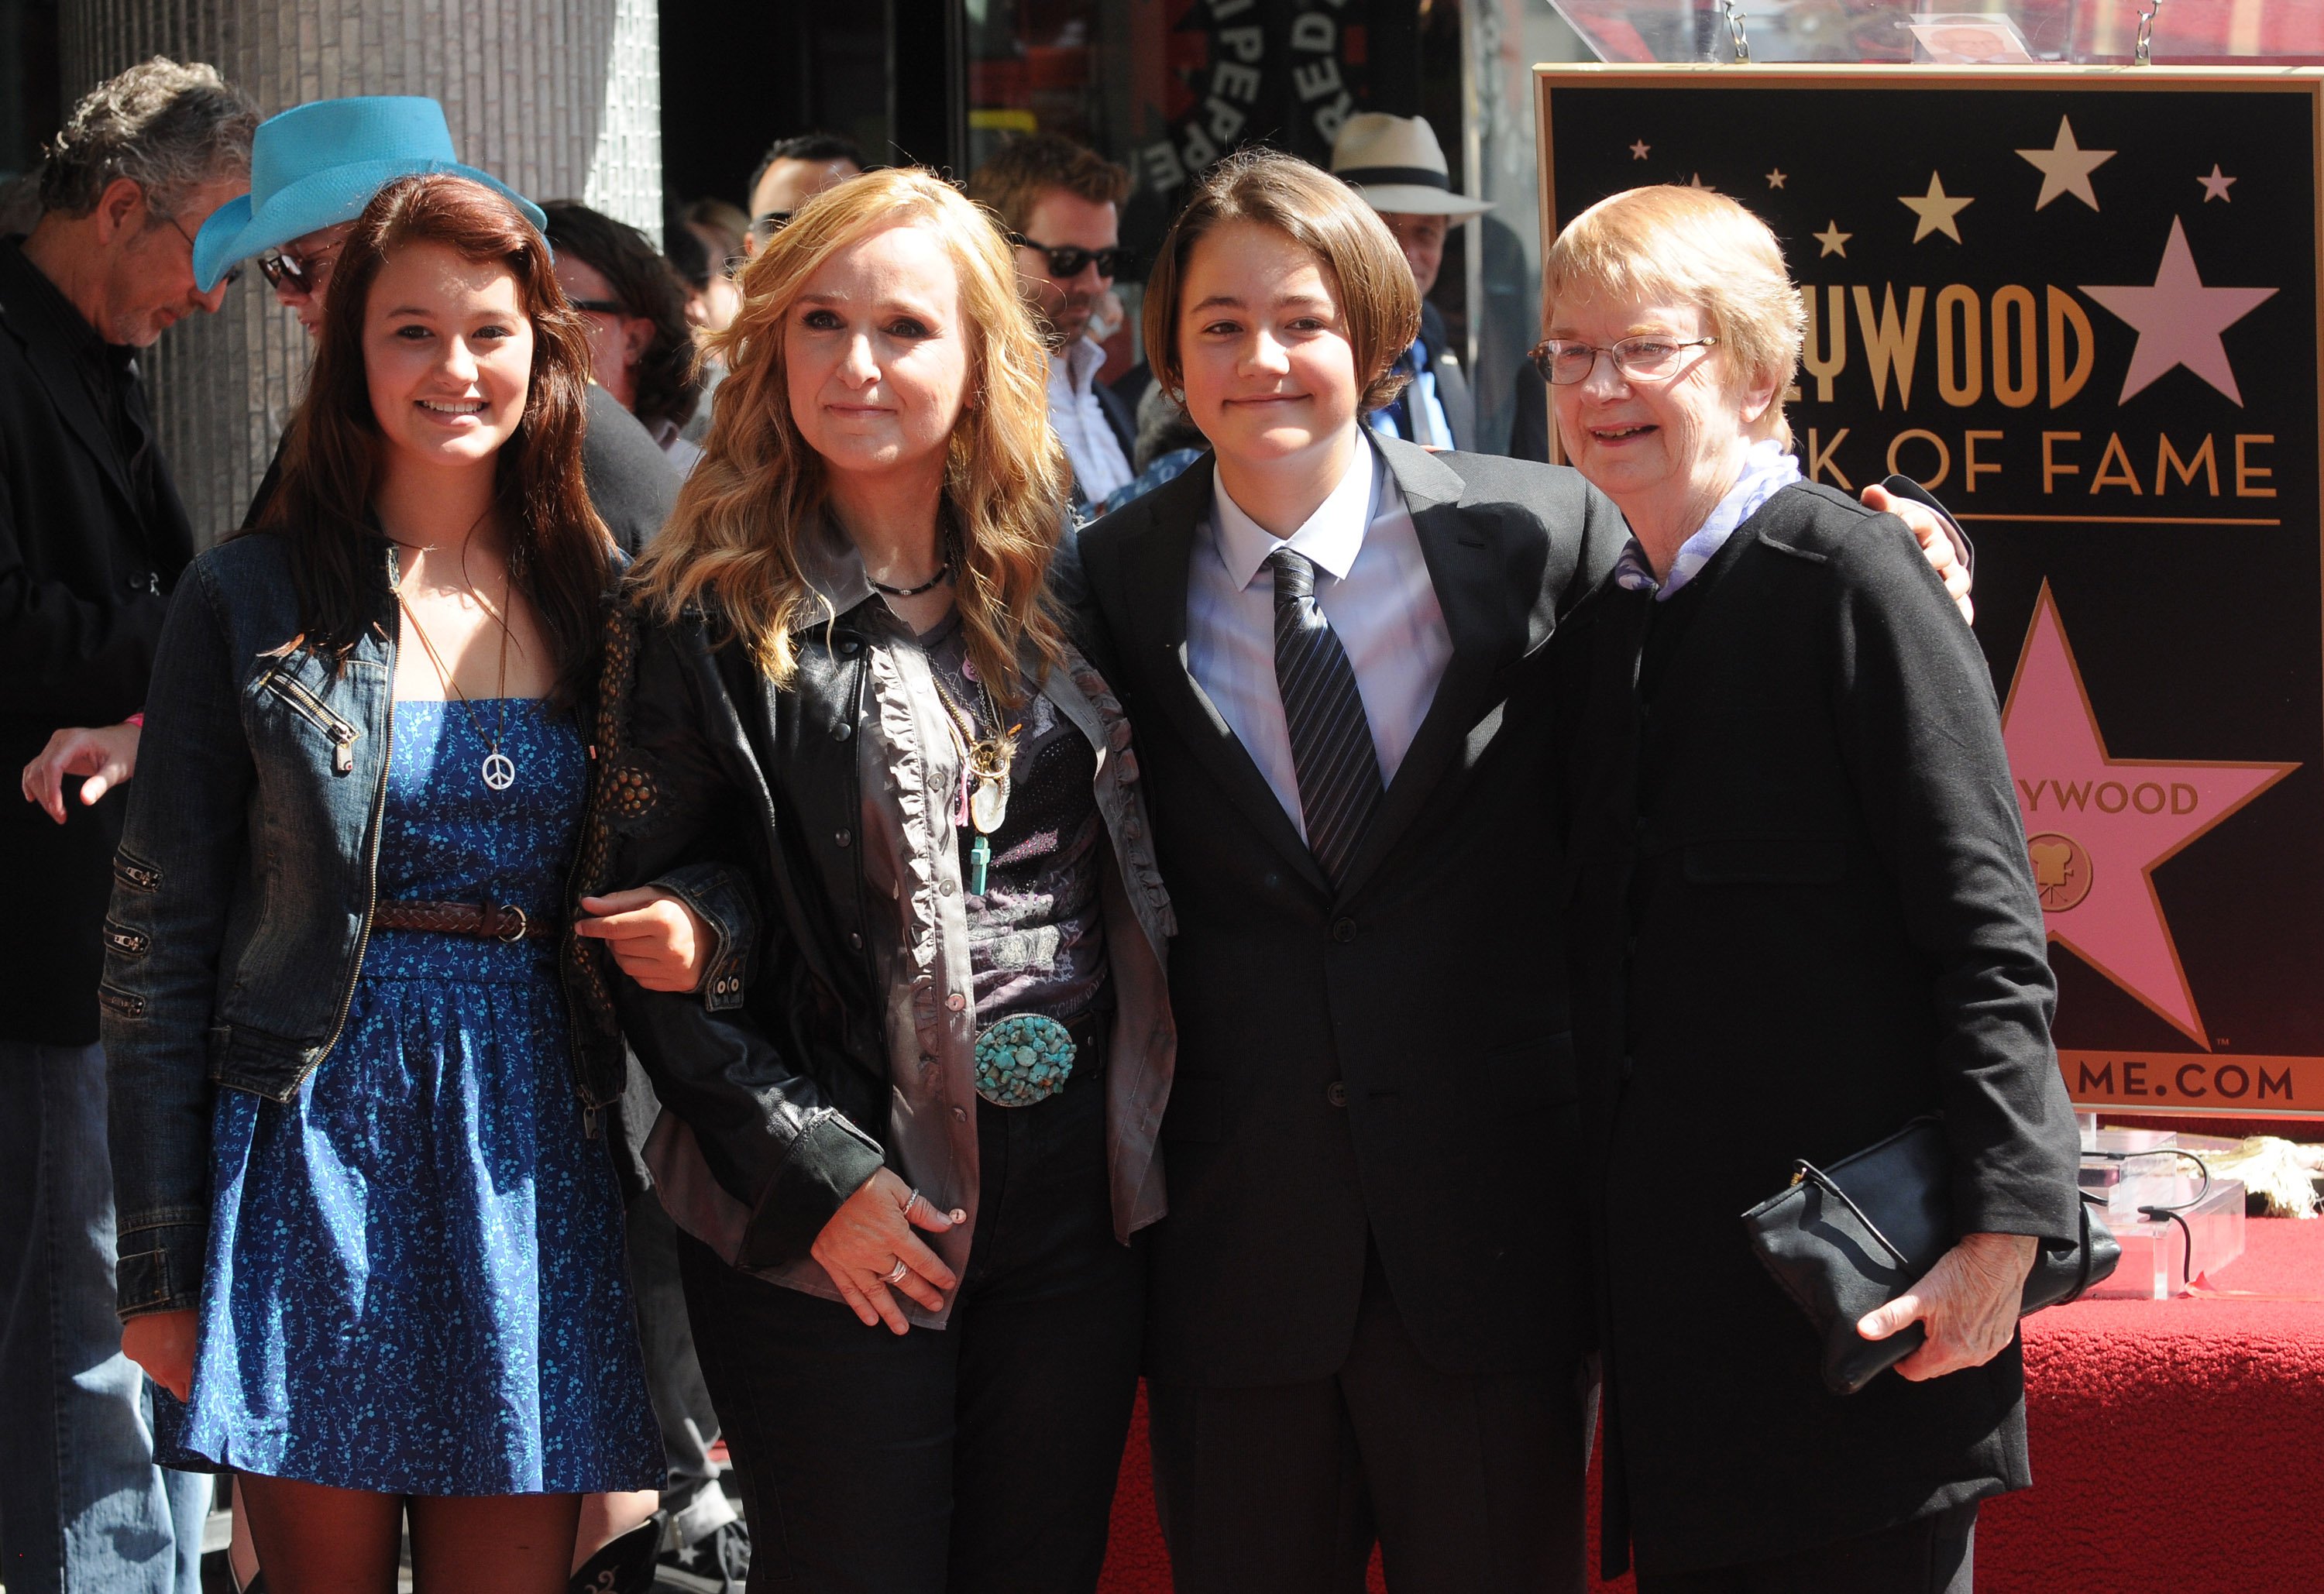 Bailey Cypher, Melissa Etheridge, Beckett Cypher and Elizabeth Williamson attend Melissa Etheridge's Hollywood Walk of Fame Induction Ceremony on September 27, 2011, in Hollywood, California. | Source: Getty Images.